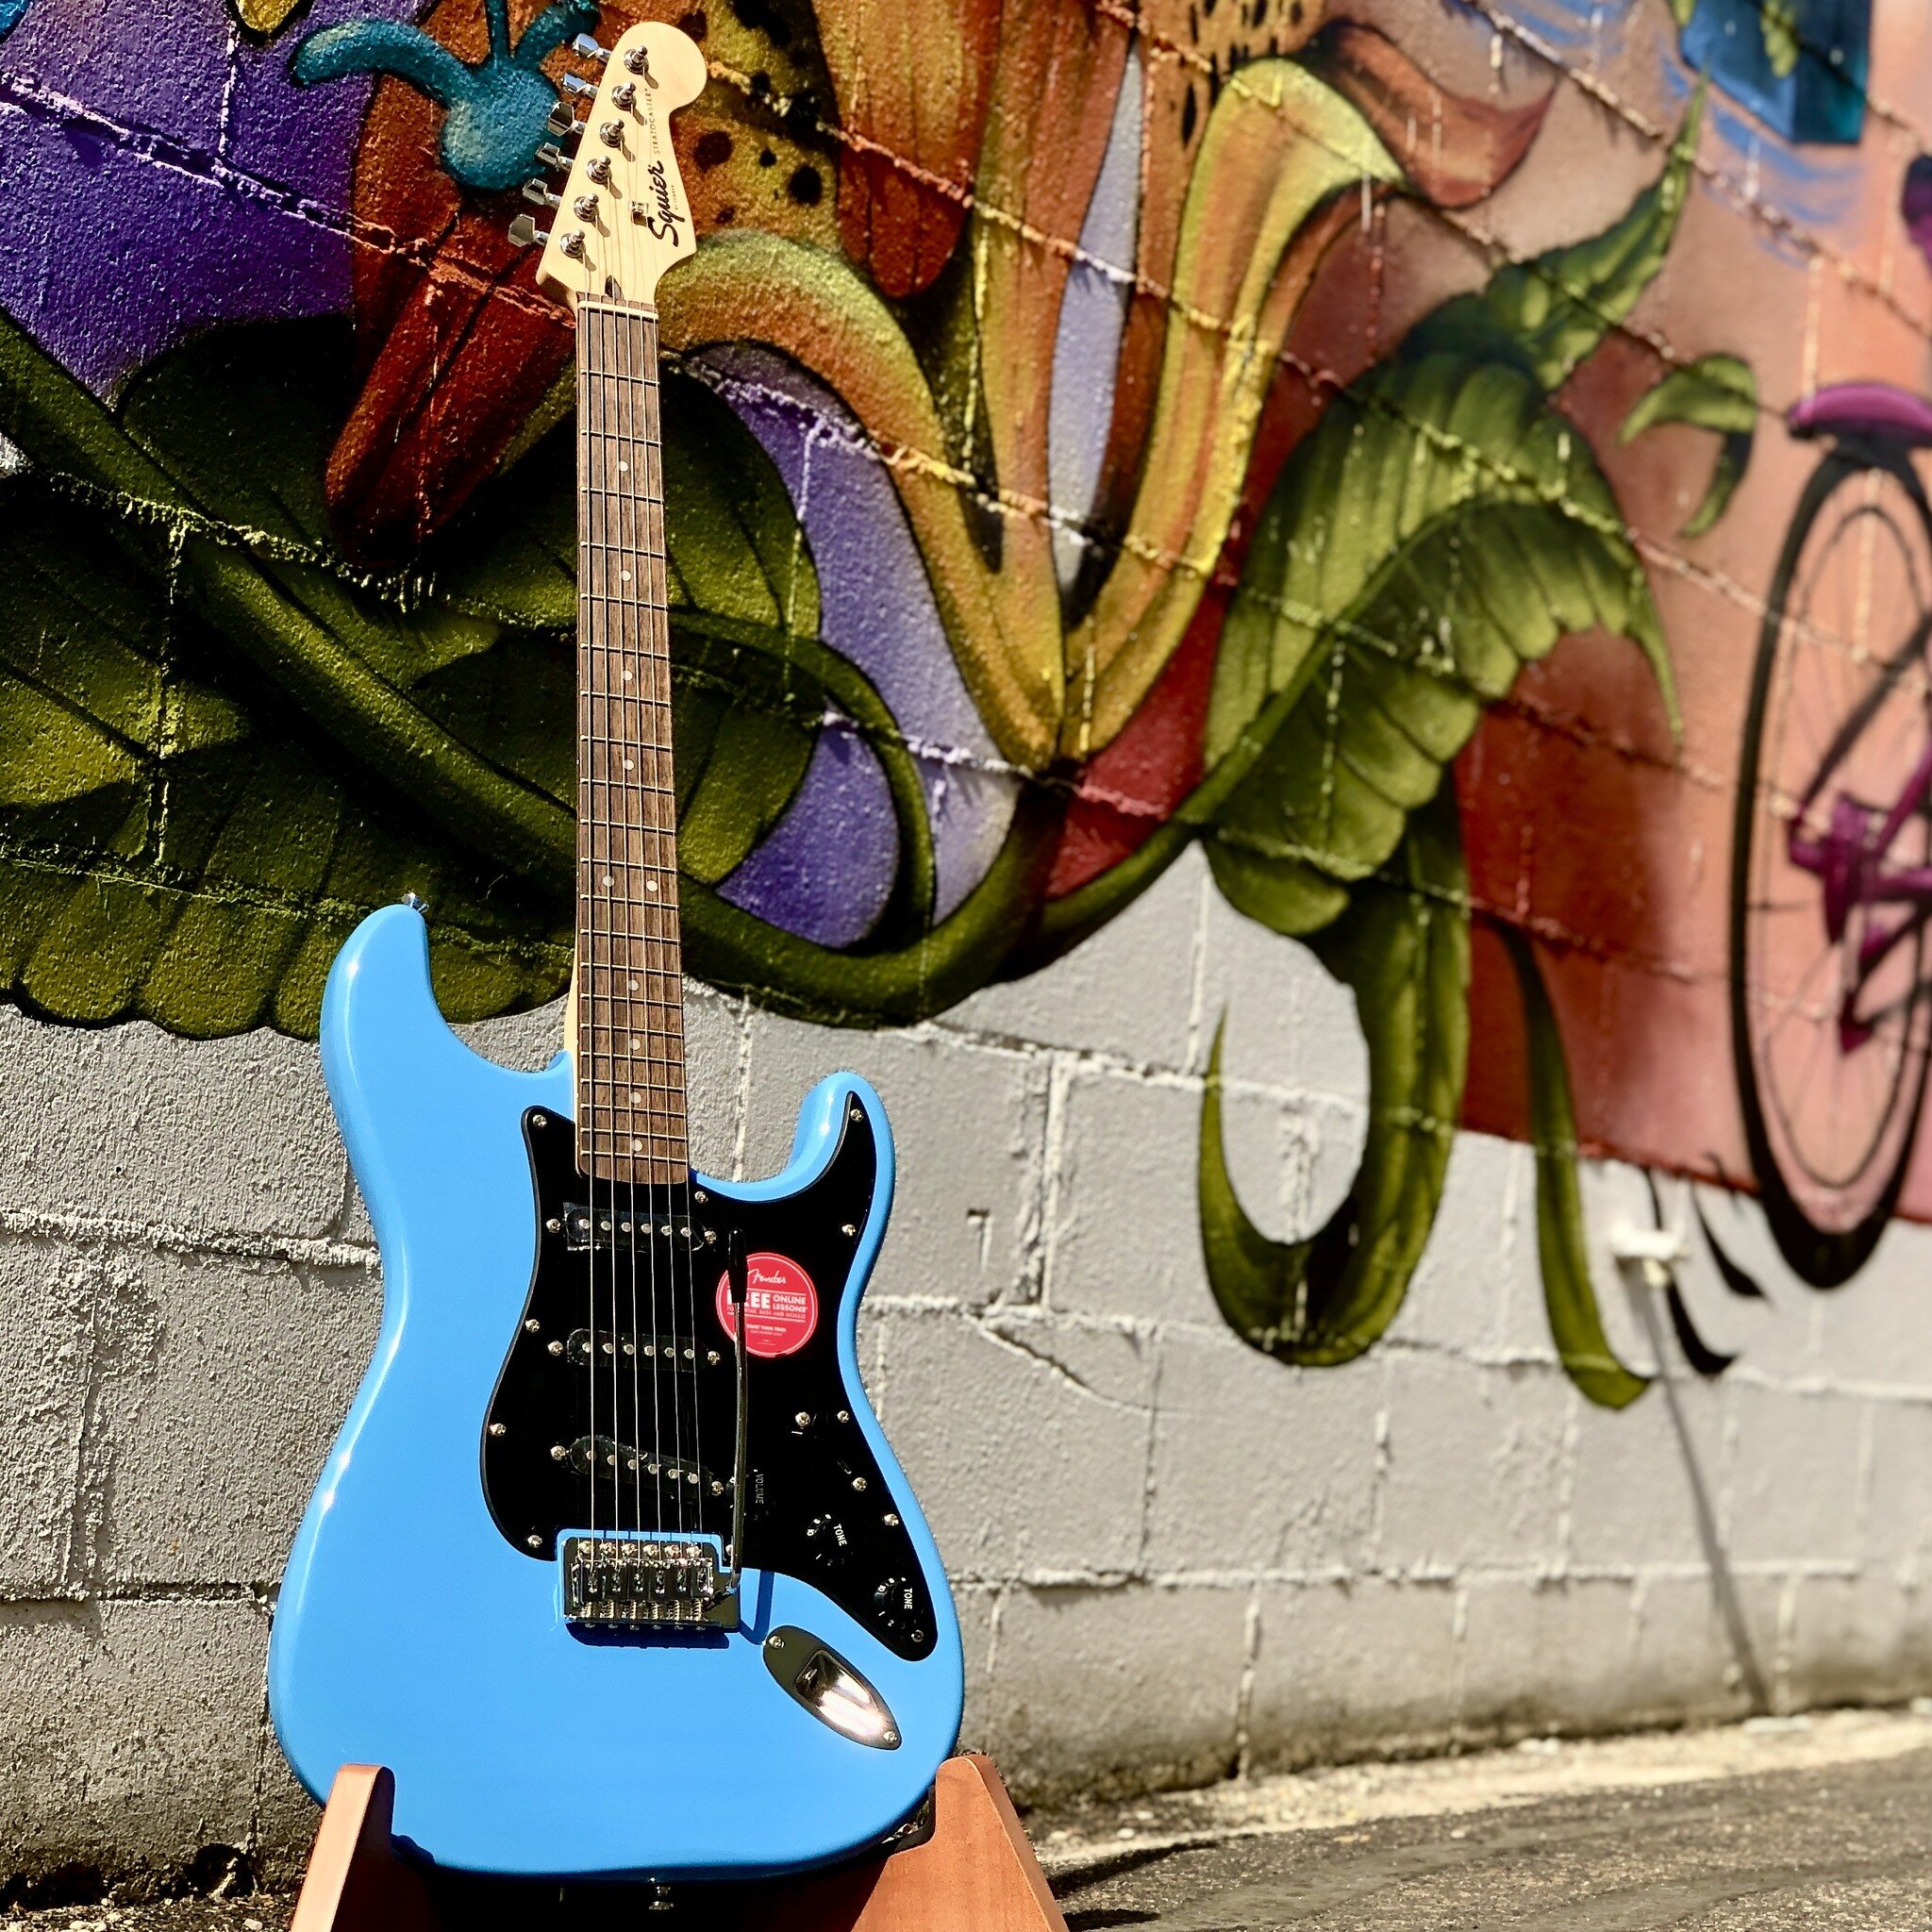 The sweet new Sonic Strat from Squier kicks off this fine #Straturday, in beautiful California Blue! Reliable construction, iconic design, and an affordable price make this axe one of the most popular first instrument picks around. With a trio of cer